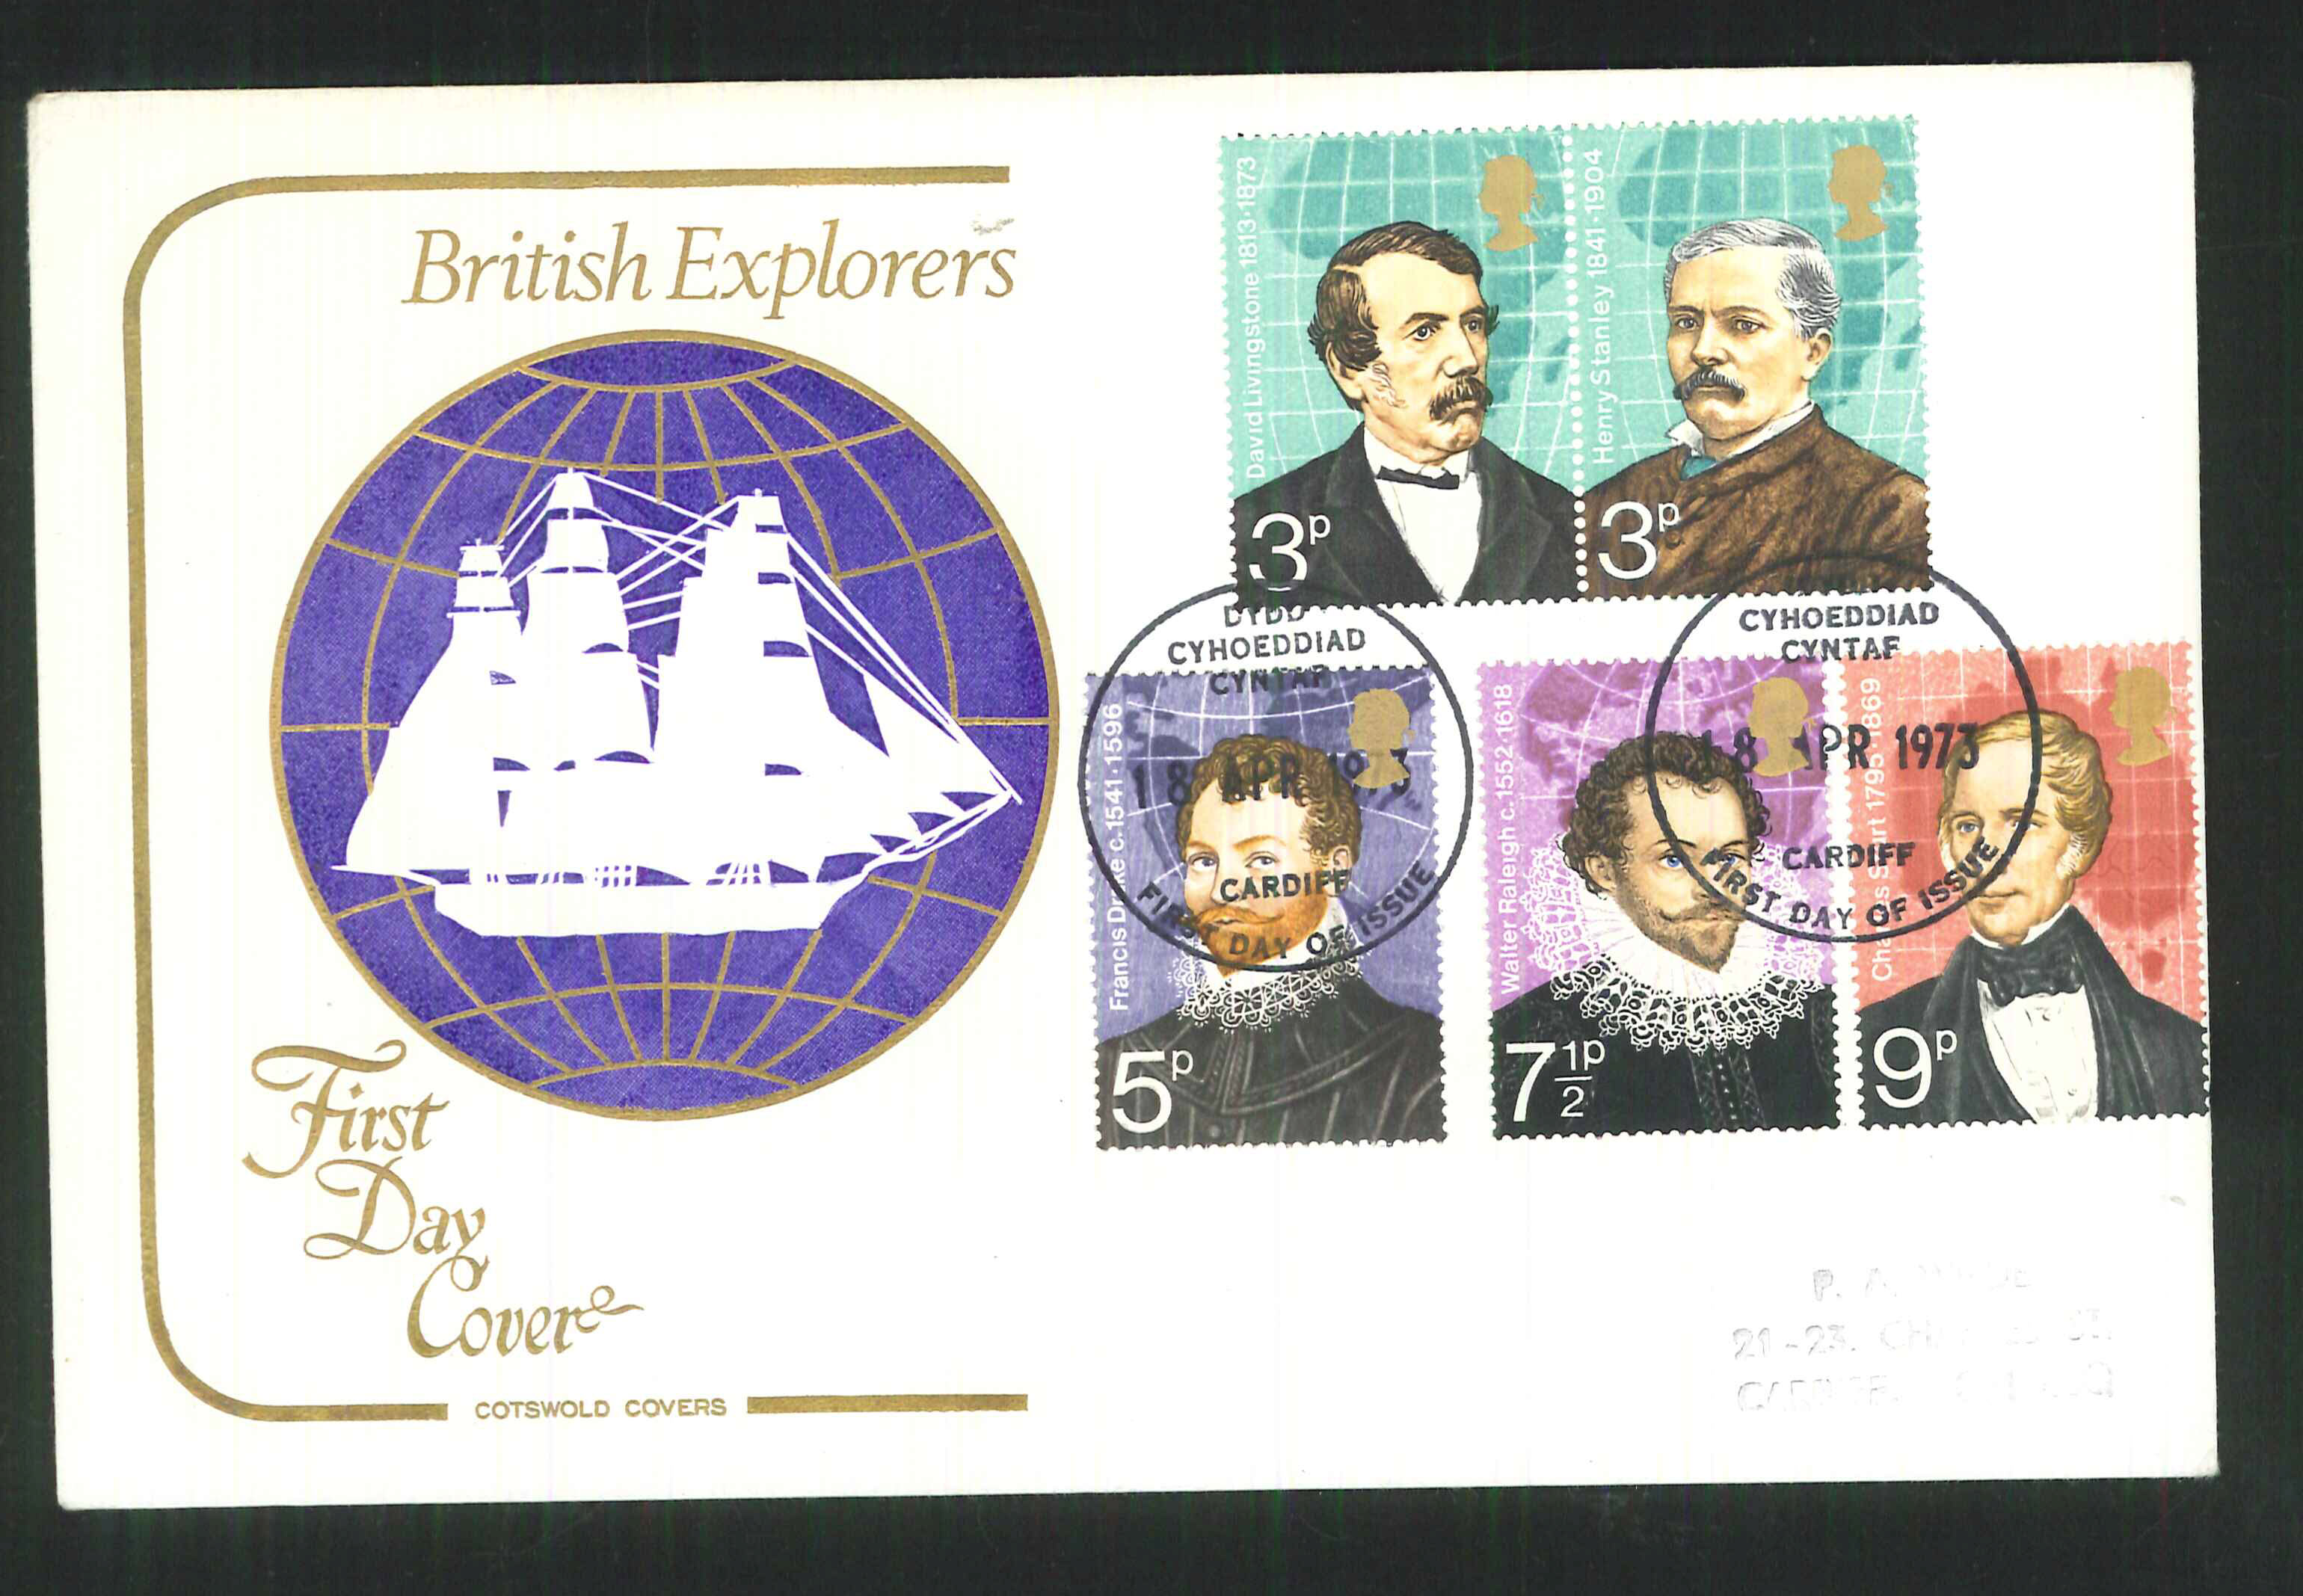 1973 Cotswold British Explorers FDC Cardiff Postmark - Click Image to Close